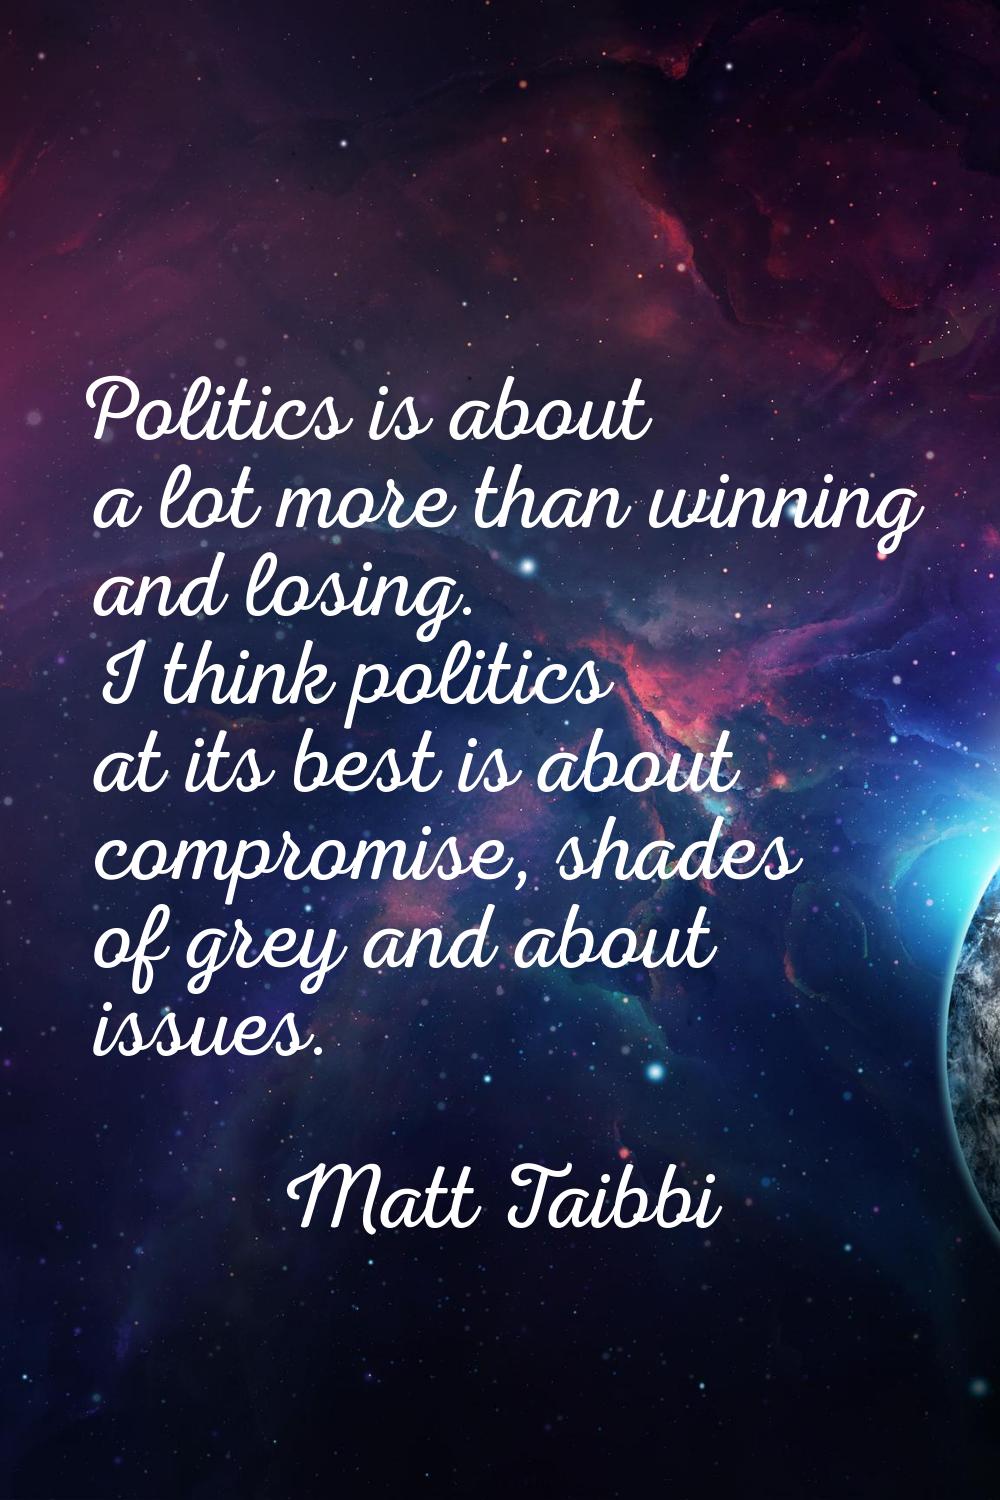 Politics is about a lot more than winning and losing. I think politics at its best is about comprom